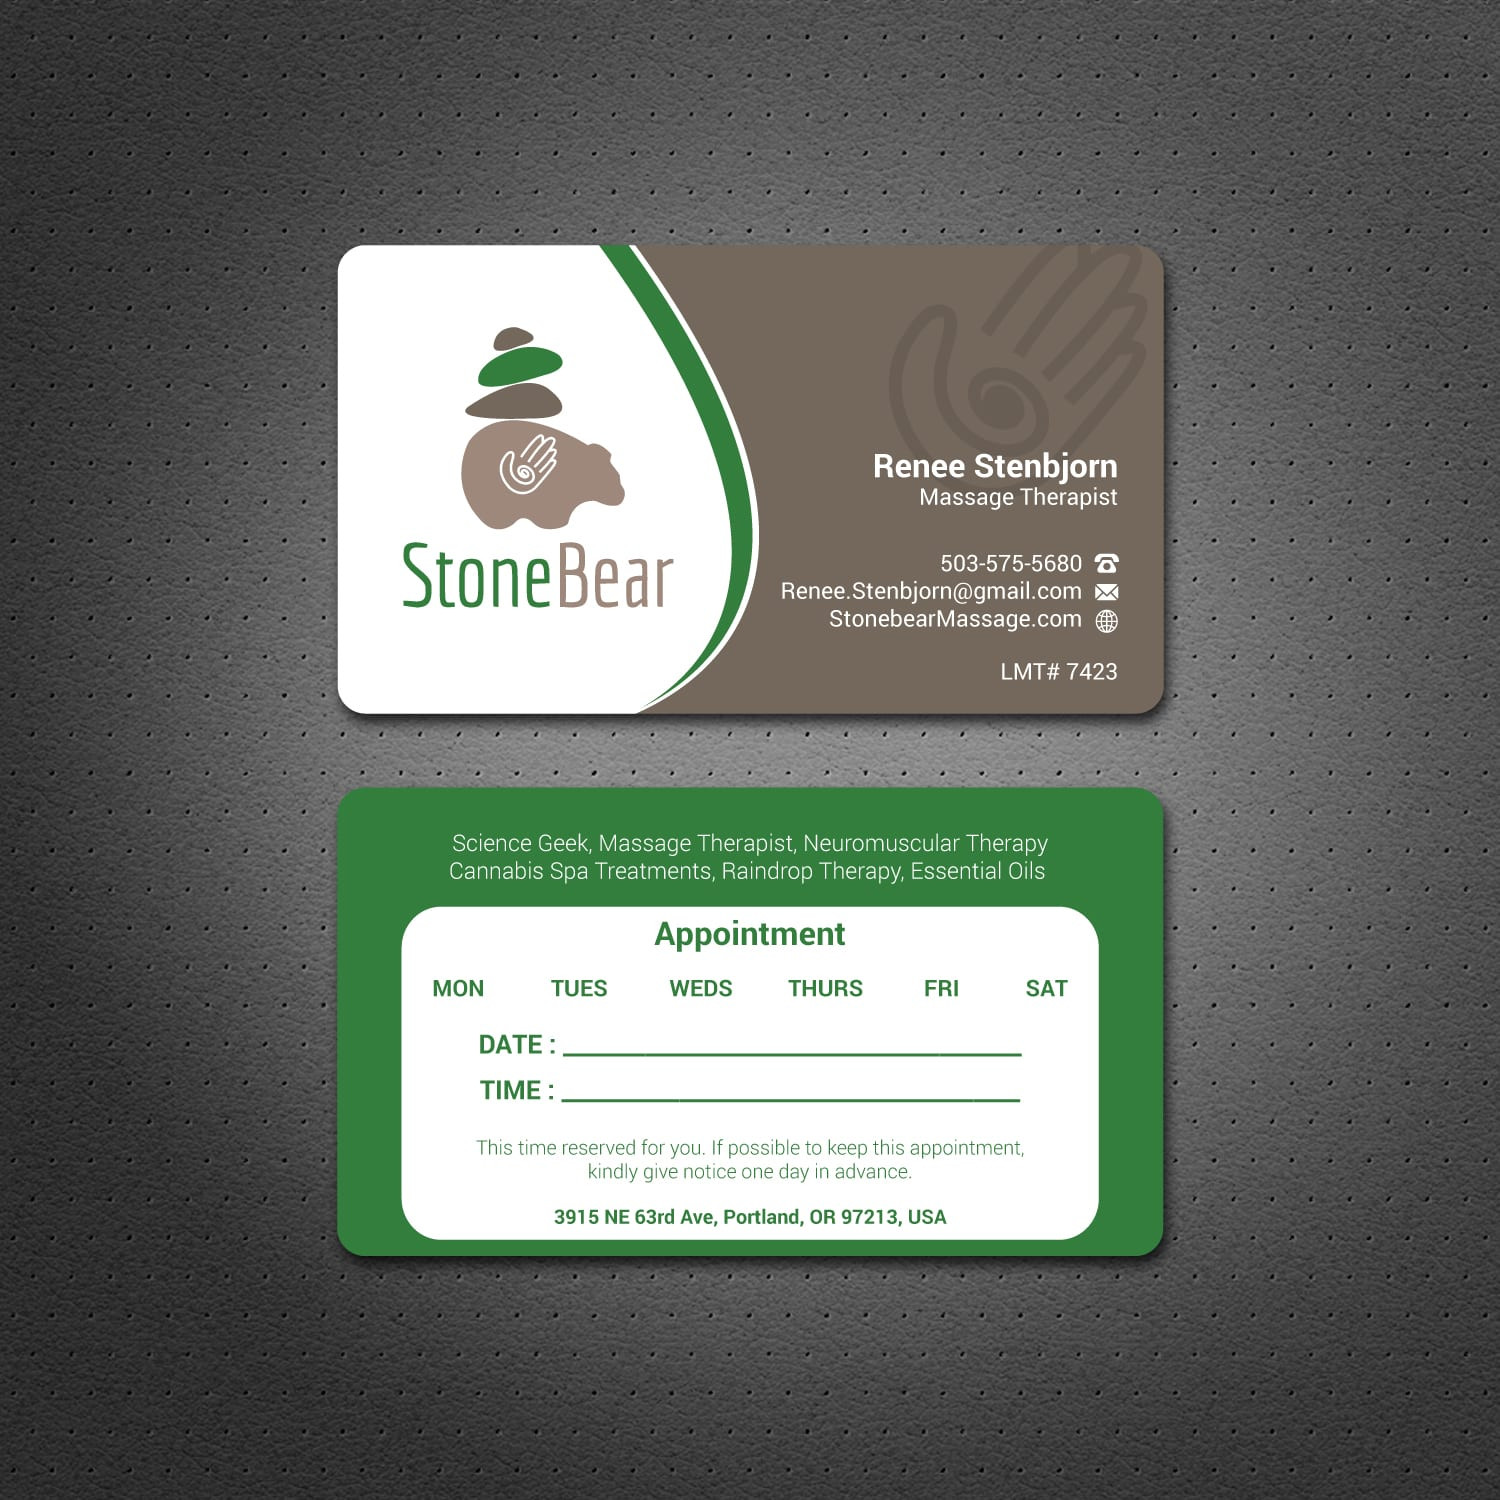 mobile massage therapist business cards best student